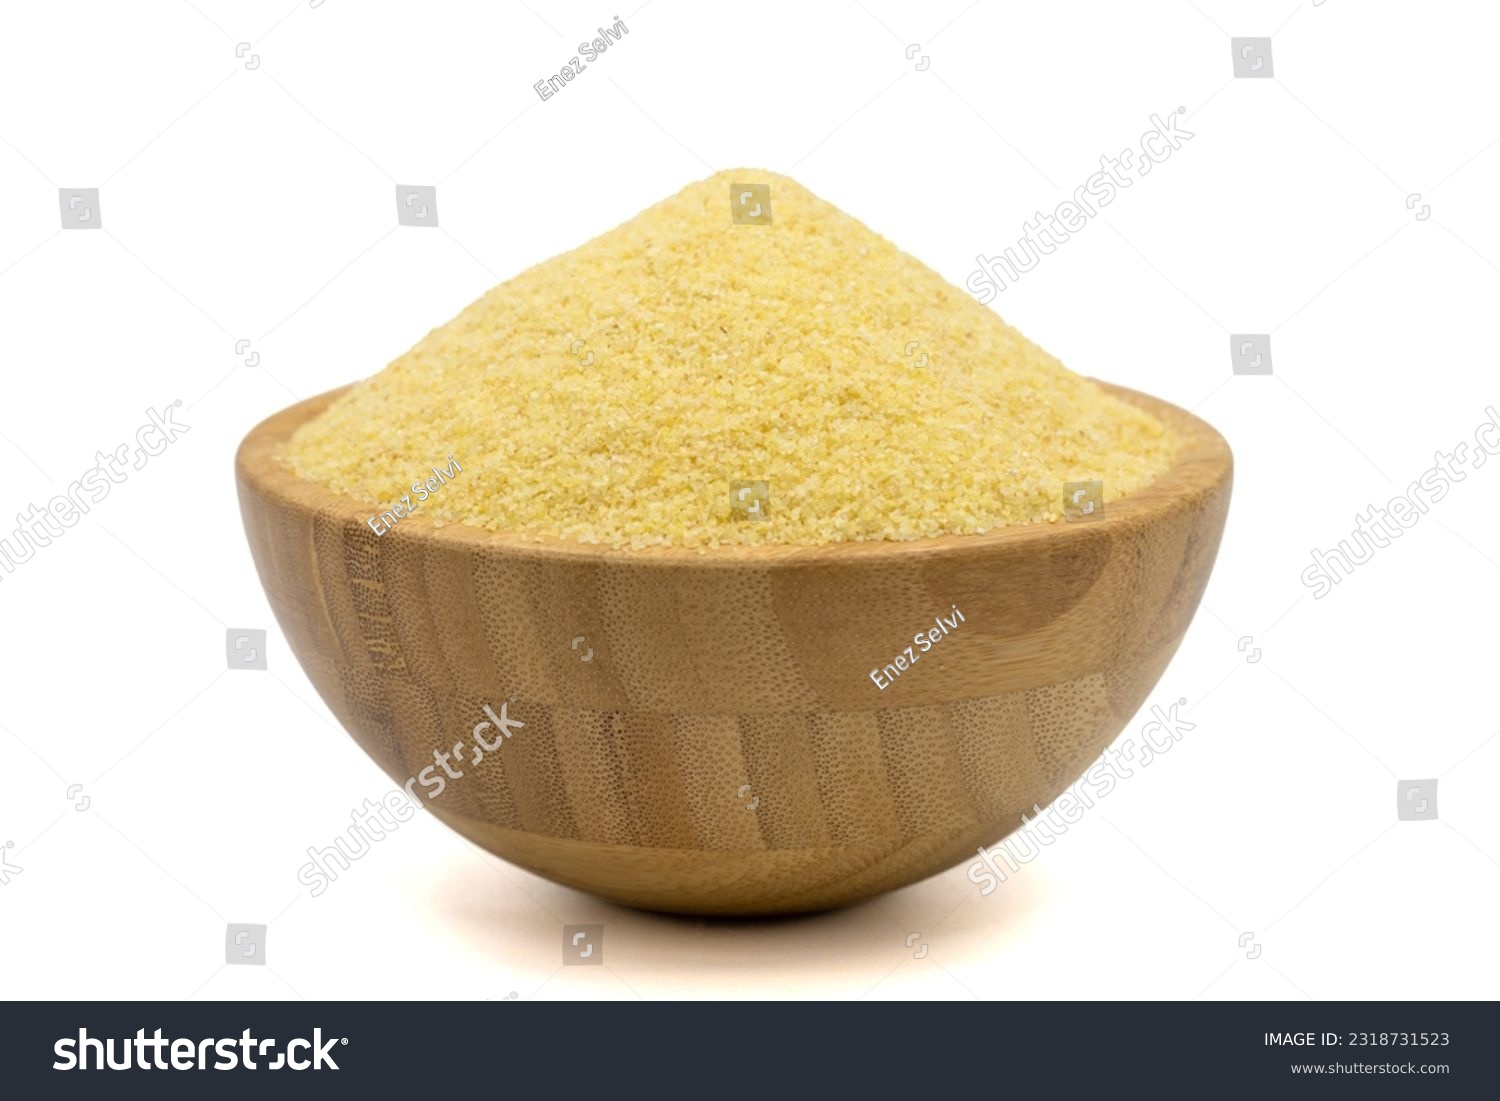 Dry organic semolina flour isolated on white background. Uncooked organic semolina in wooden bowl #2318731523